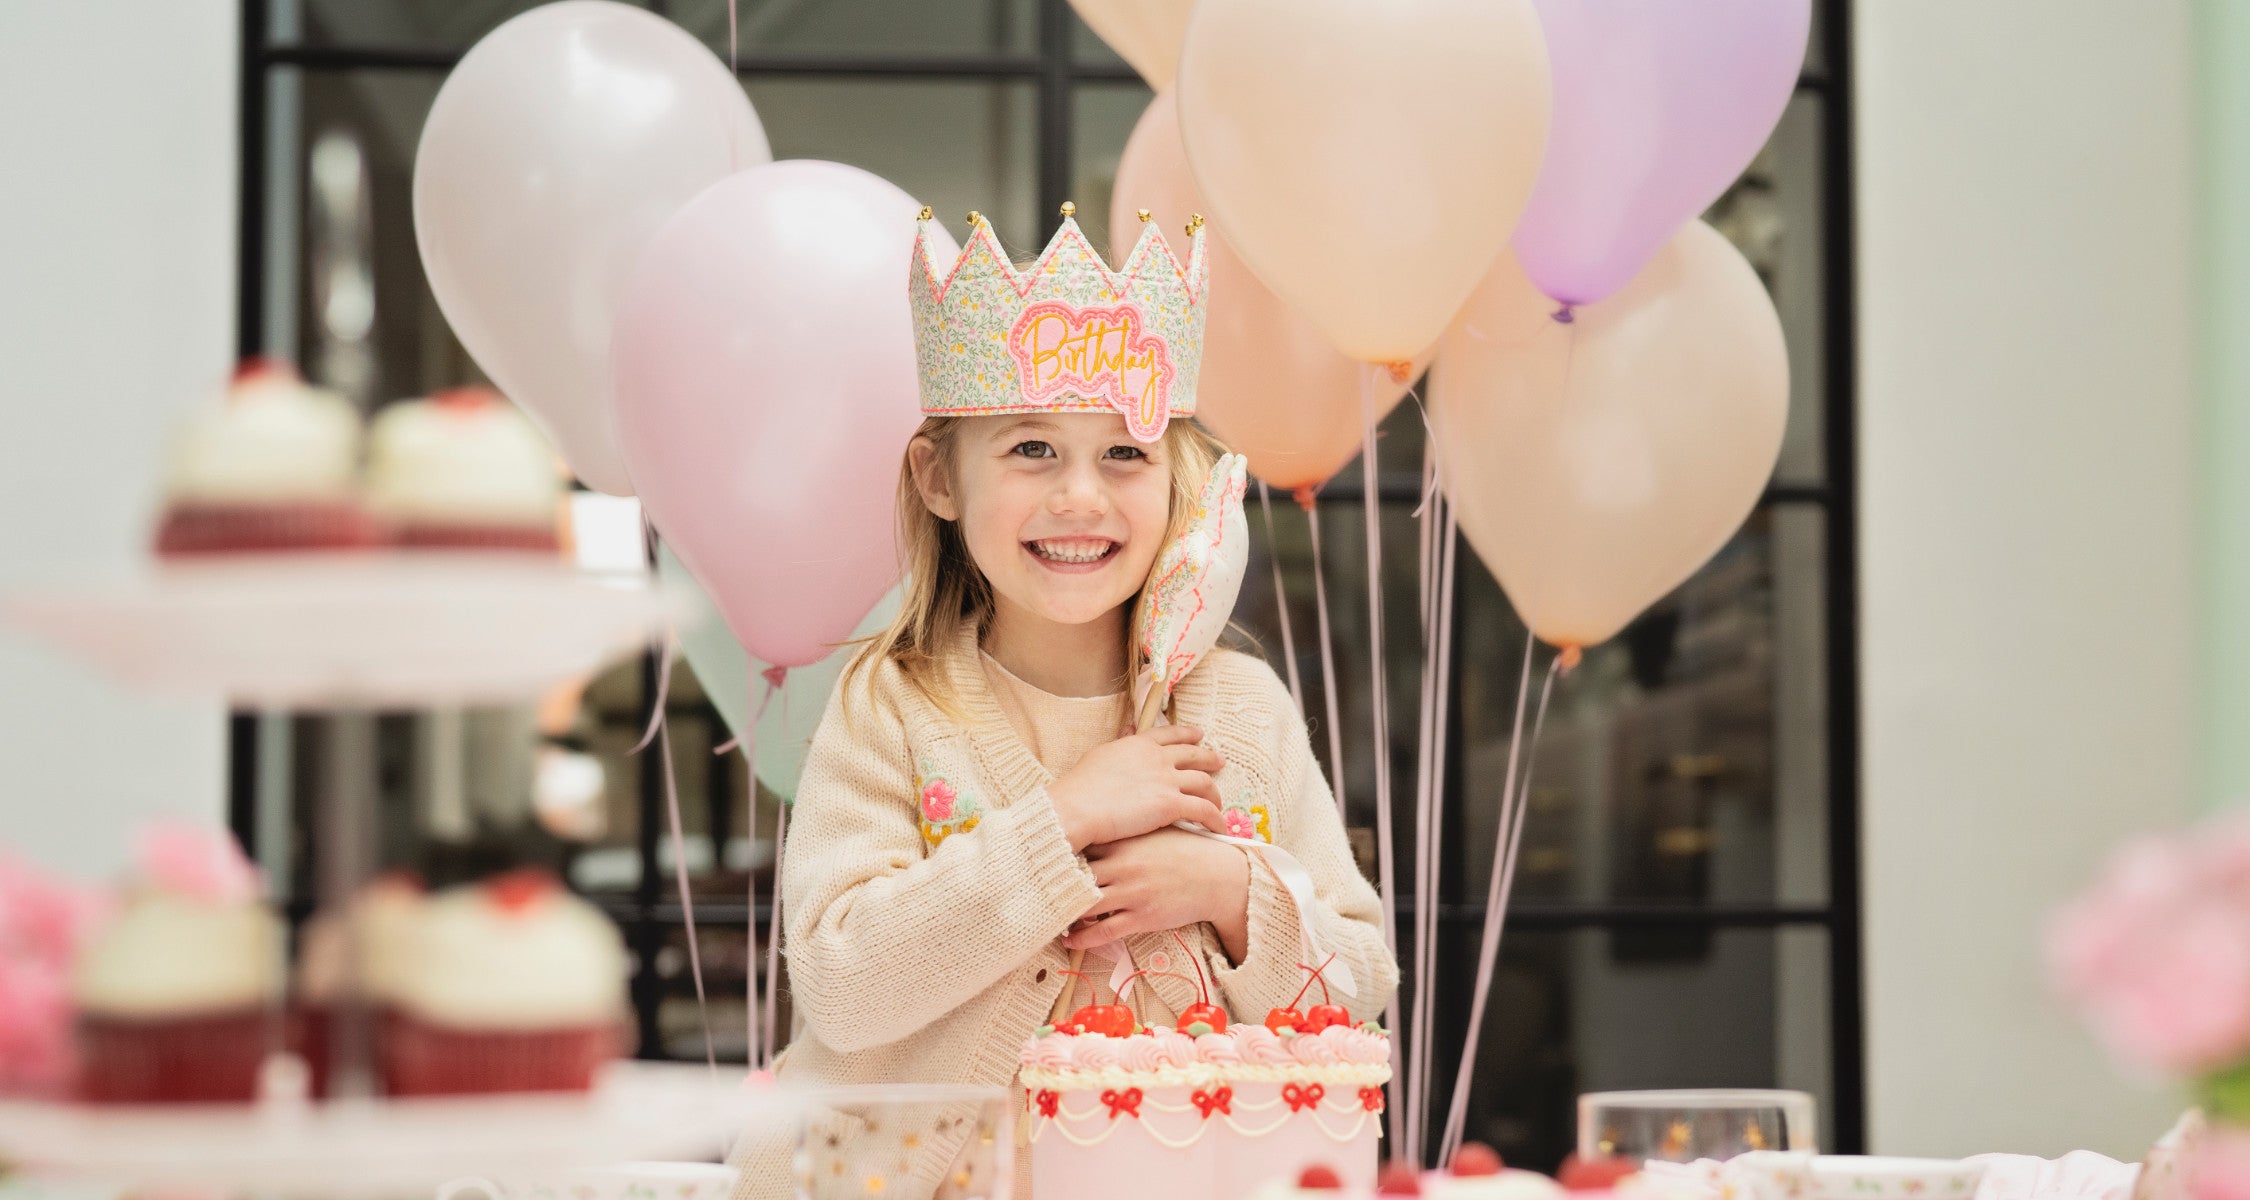 How To Plan A Super Childrens’ Party